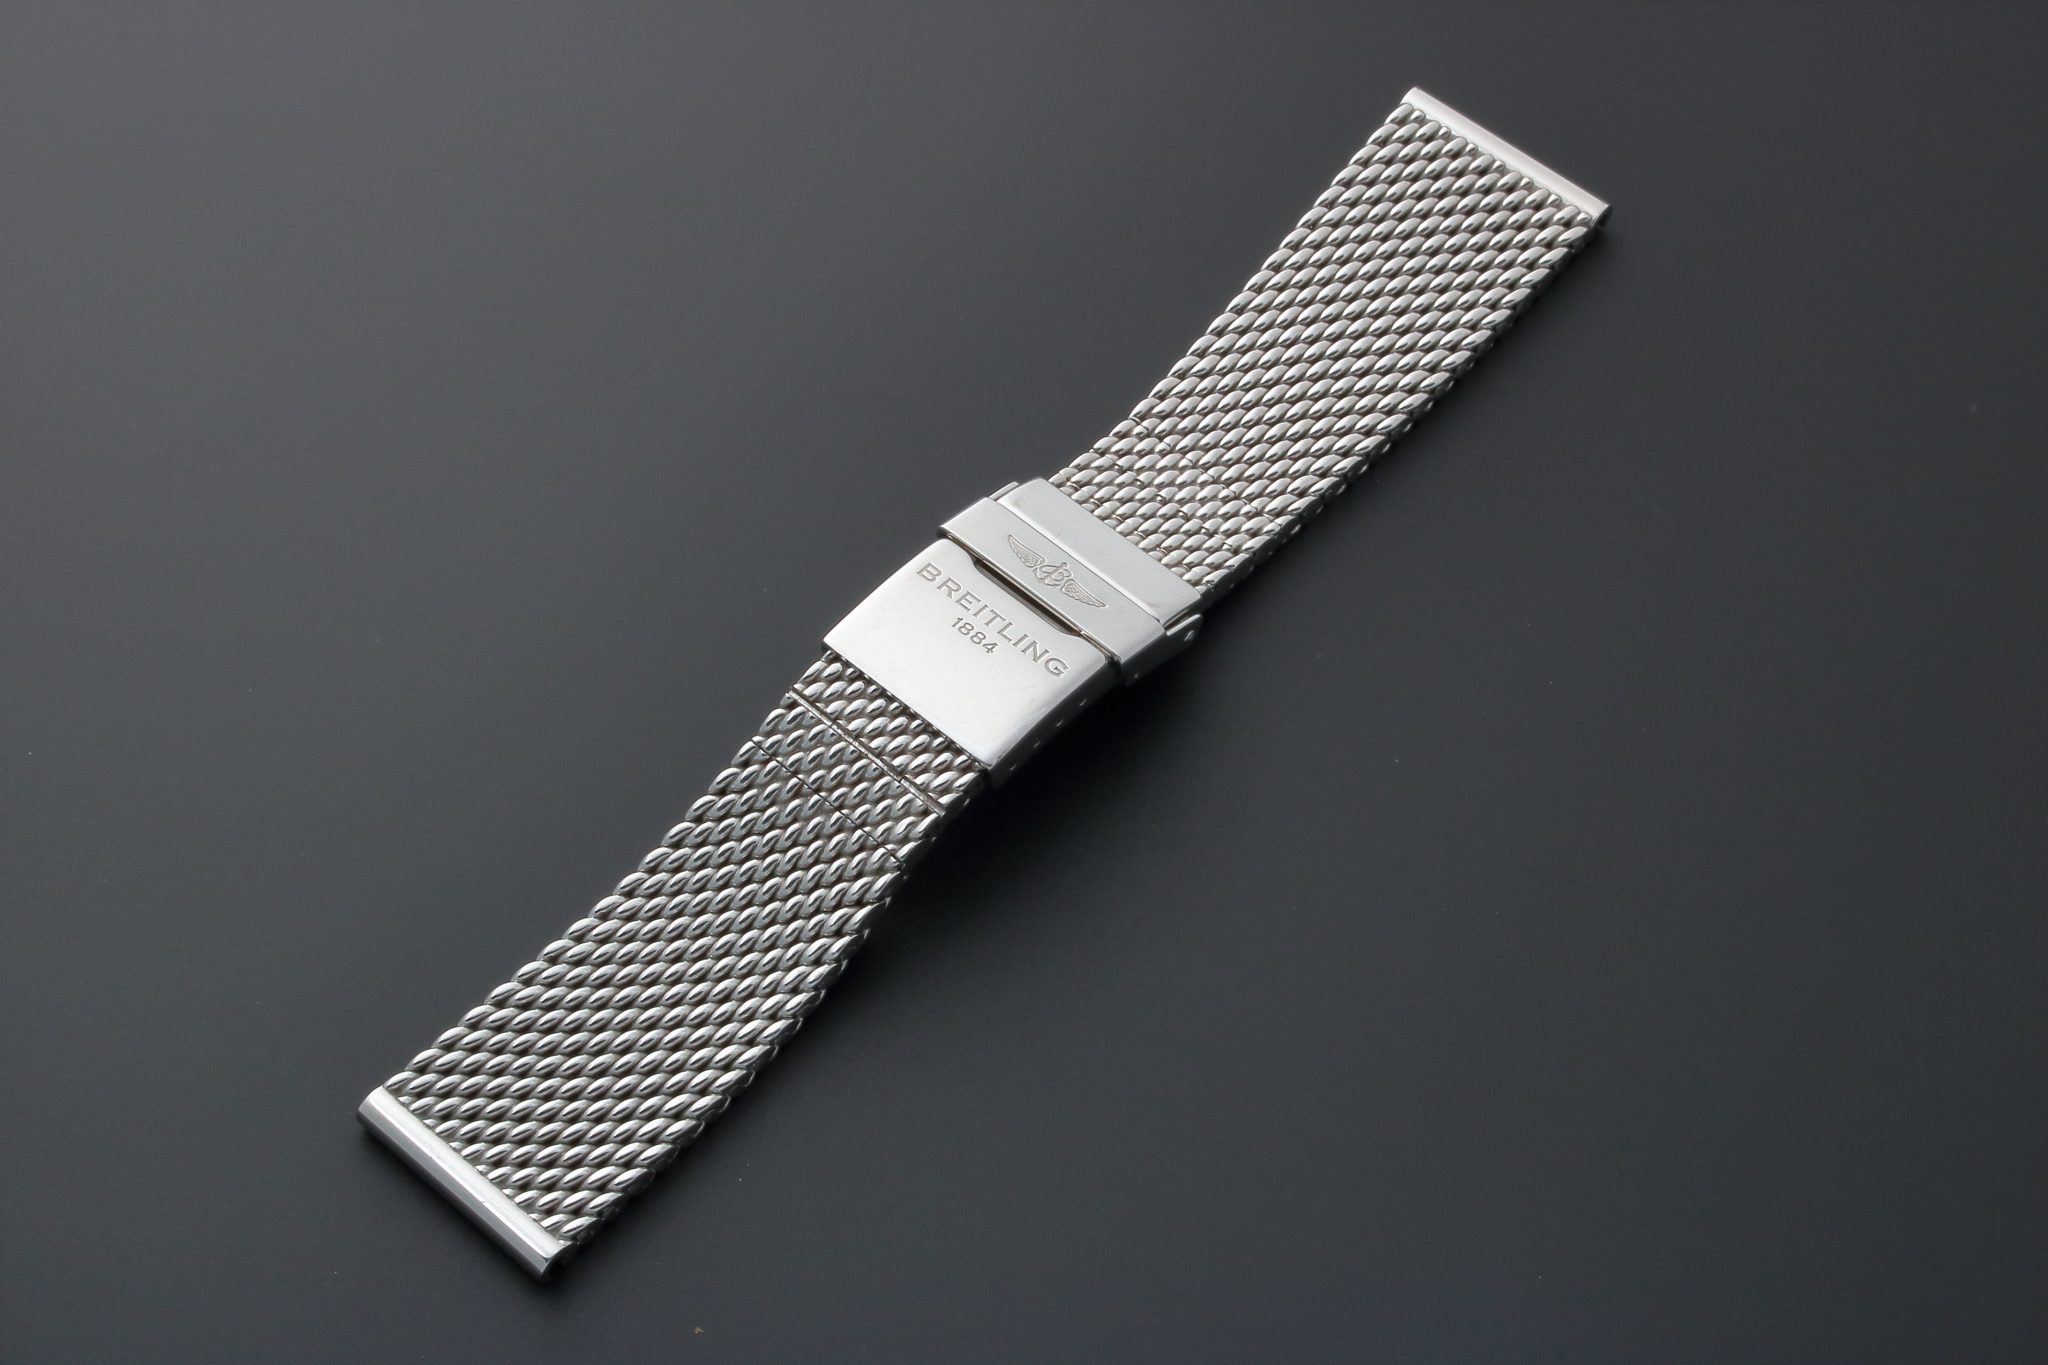 TTUCFA 22mm 24mm Silver Stainless Steel Watch Bracelet For Breitling Strap  Watch Band For AVENGER NAVITIMER SUPEROCEAN Watchbands (Color : Stainless,  Size : 22mm) : Amazon.sg: Fashion